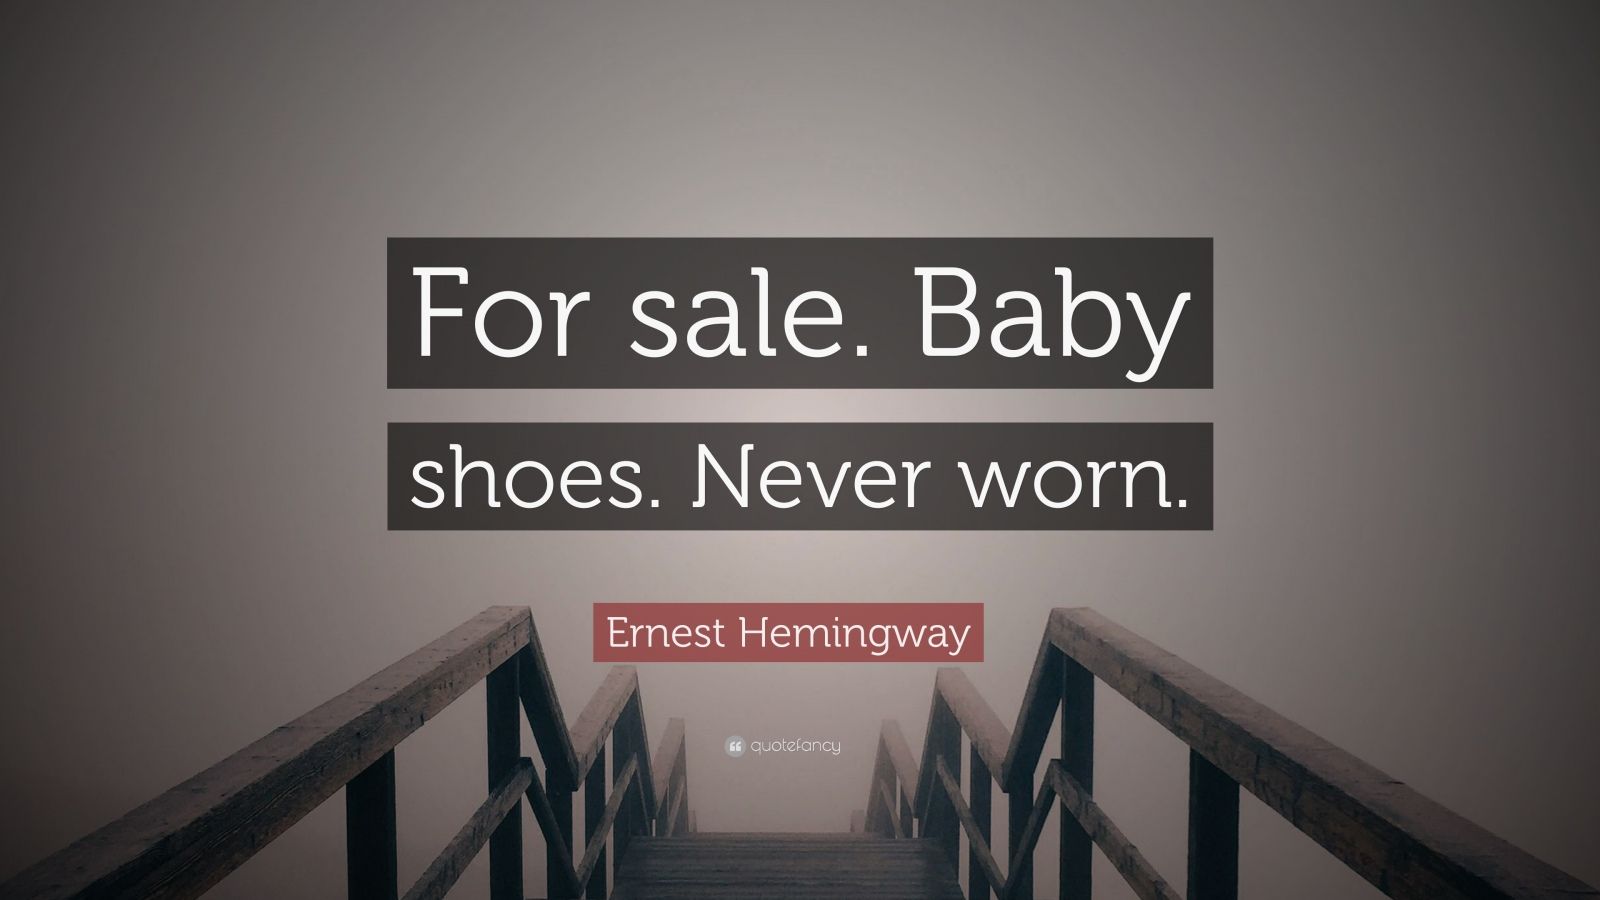 Ernest Hemingway Quote: “For sale. Baby shoes. Never worn.”